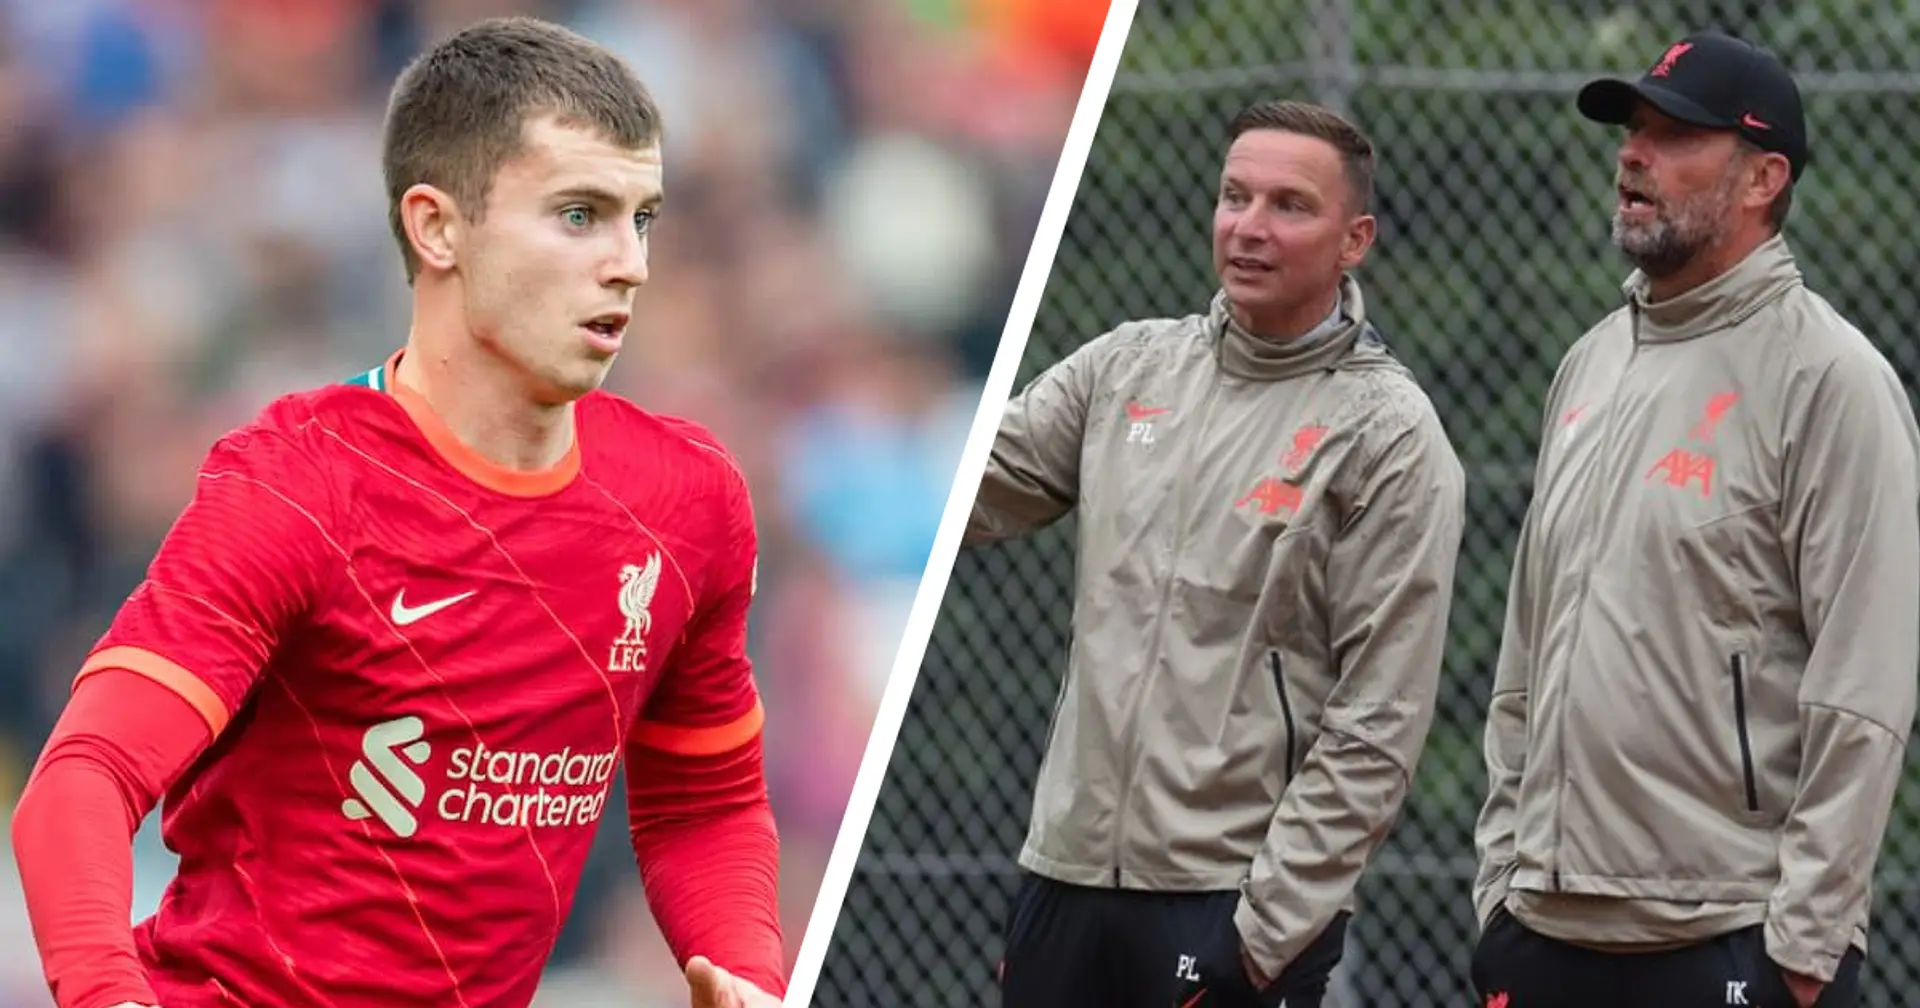 'He has an Anfield future': Klopp and Ljinders provide their verdict on unexpected pre-season performer Woodburn 